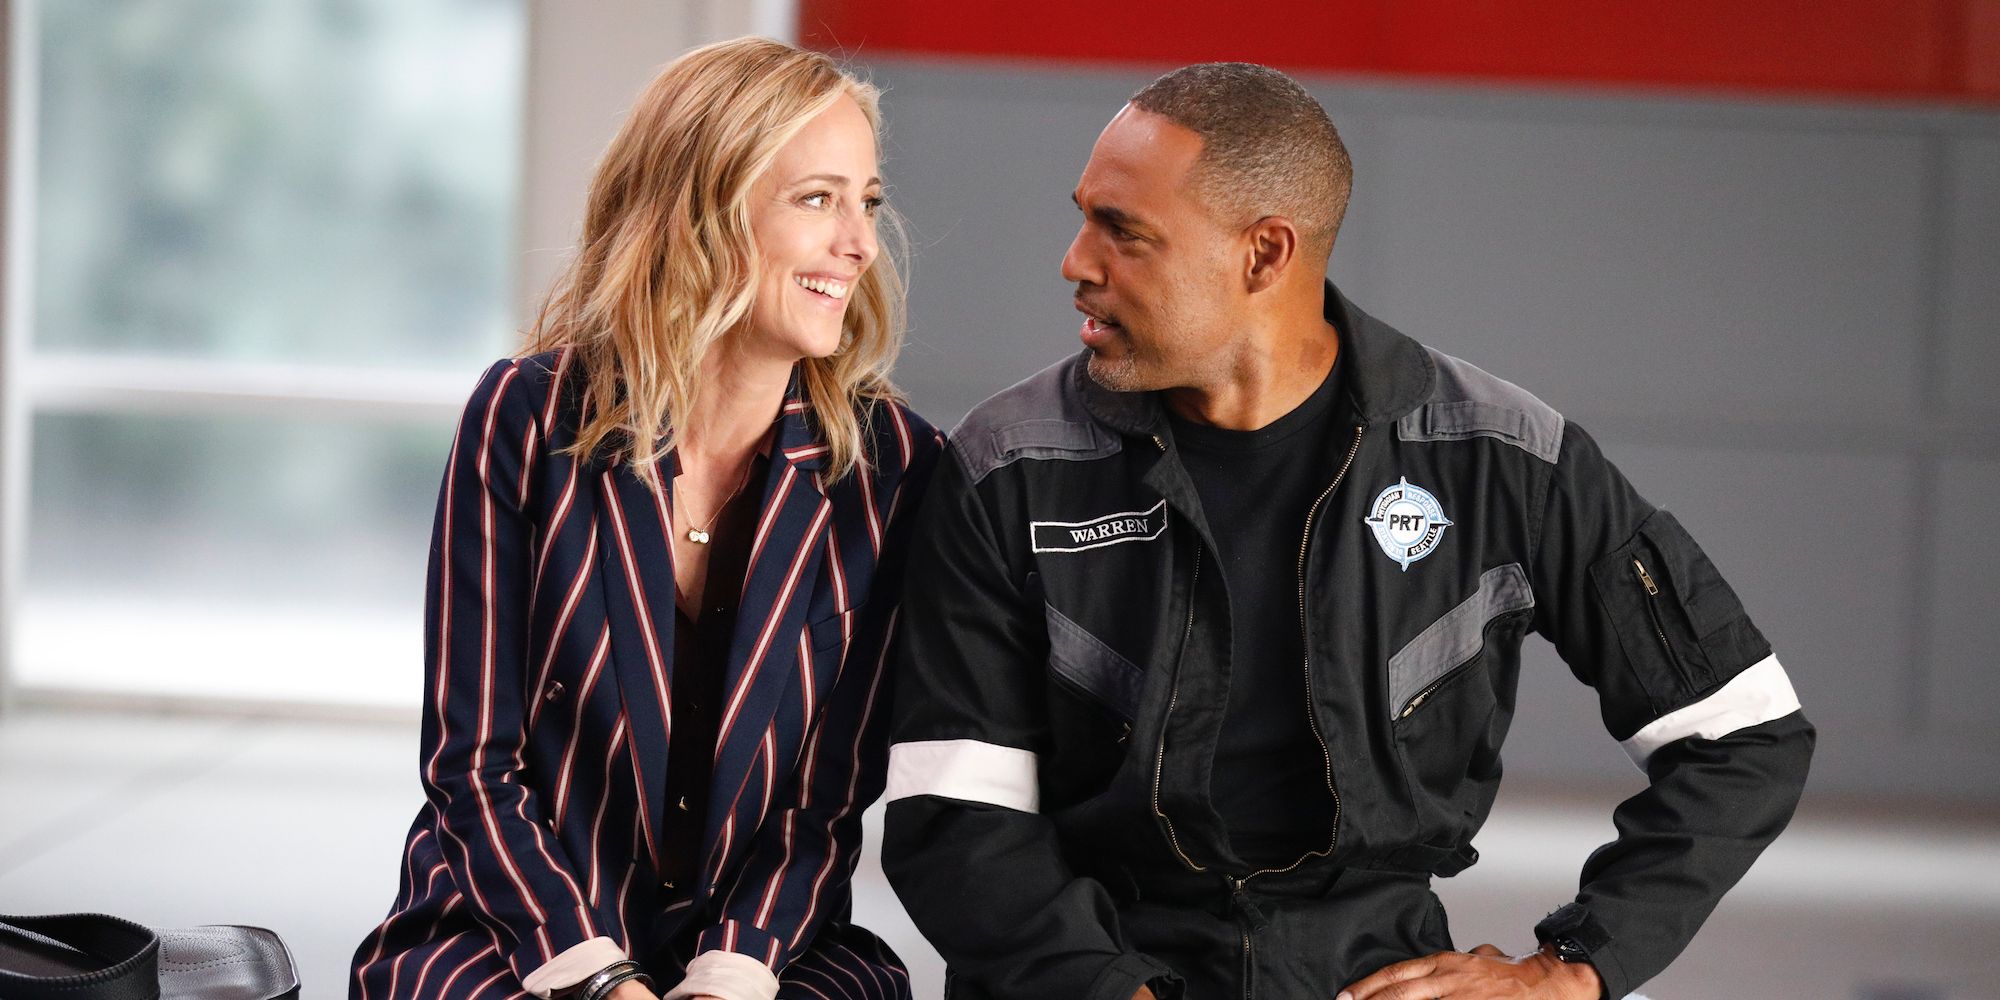 Station 19 Season 7 Ending: Ben’s Firefighter Decision & Potential Grey’s Anatomy Move Explained By Showrunner